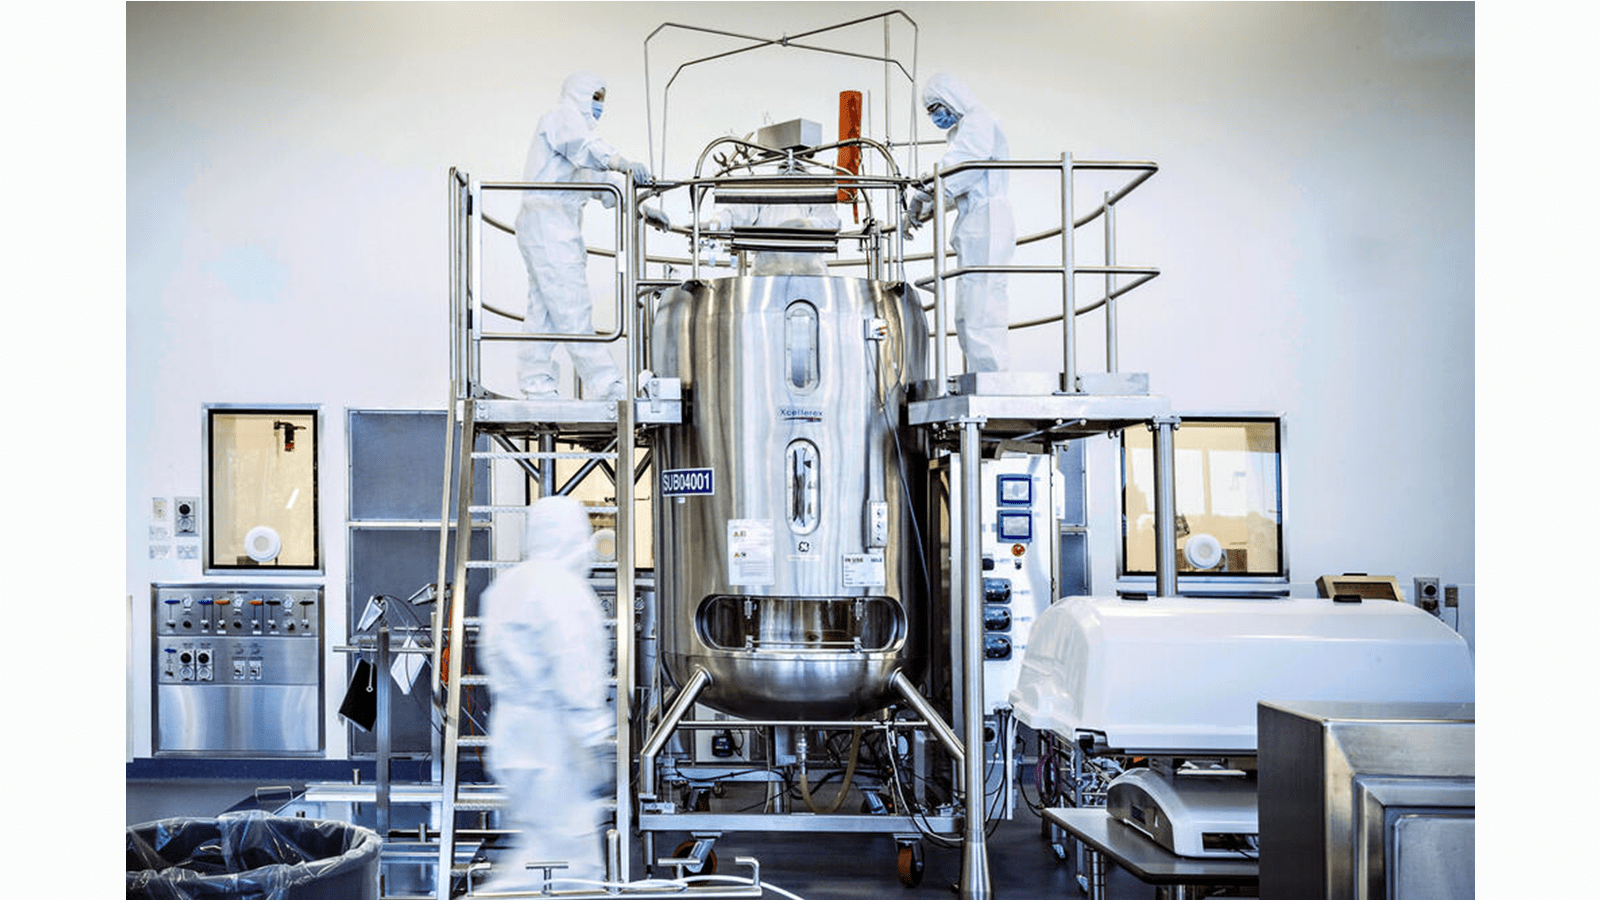 Two scientists in white protective gear work in CSL vaccine manufacturing during the COVID-19 pandemic